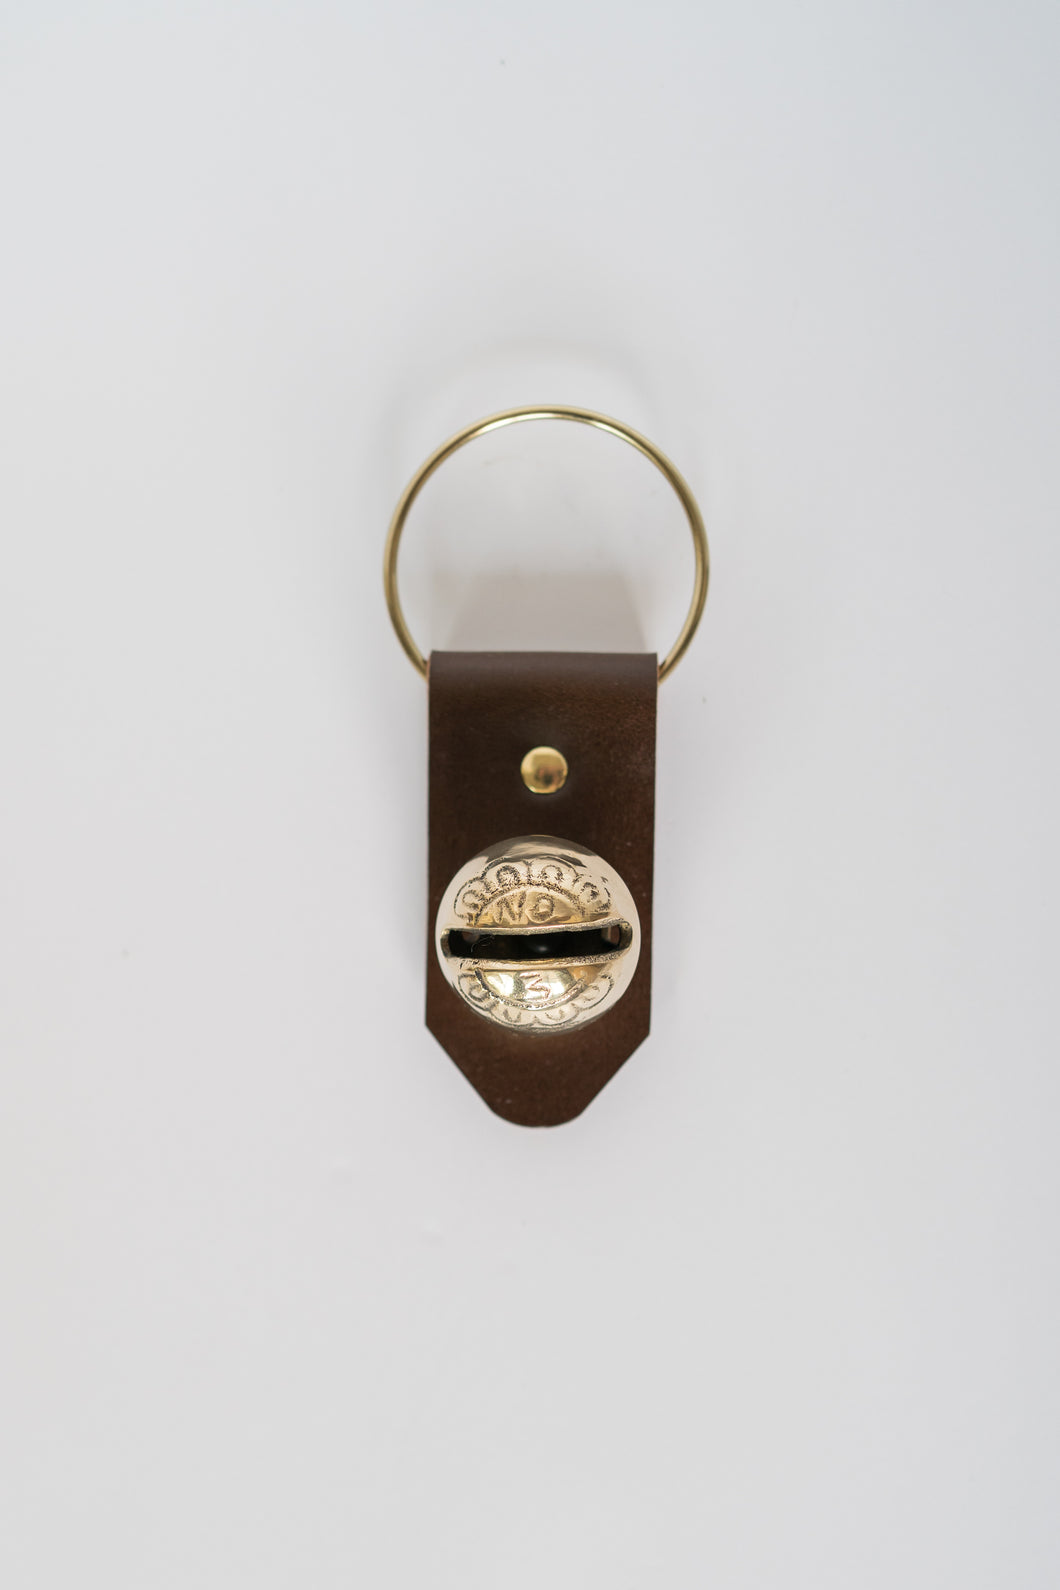 Door hanger with single bell on brown leather